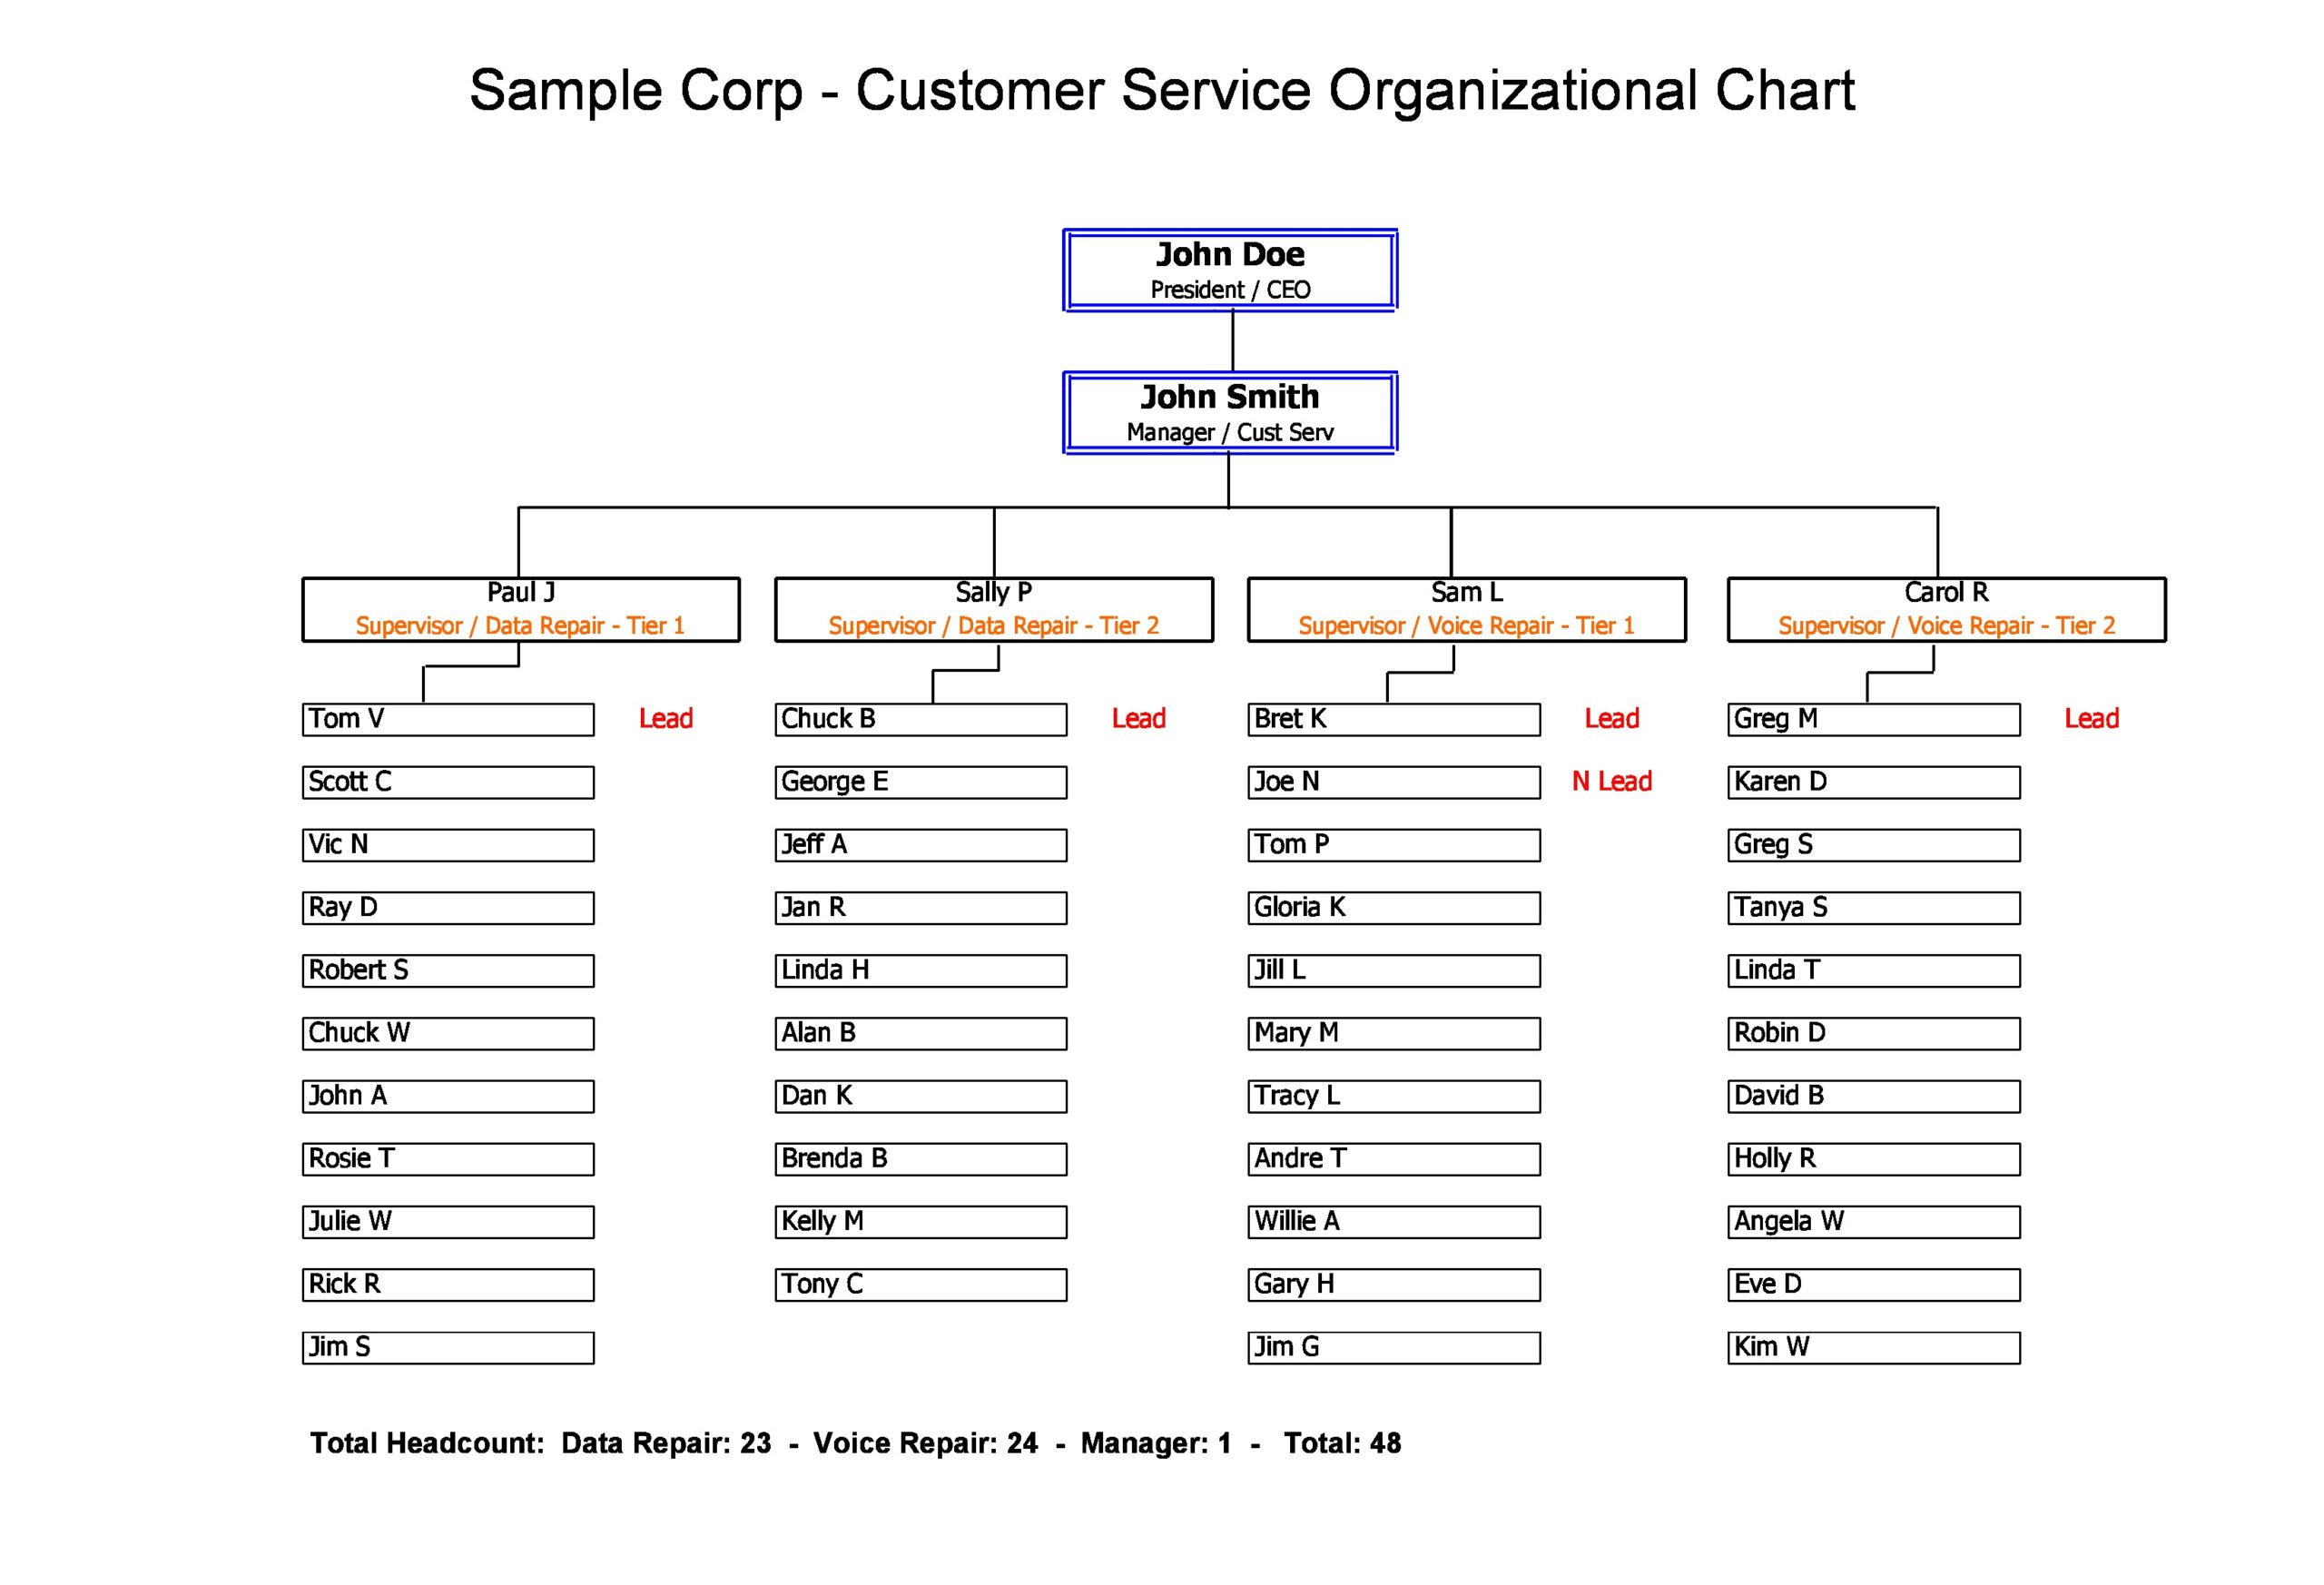 22 Free Organizational Chart Templates (Word) - TemplateArchive Within Word Org Chart Template